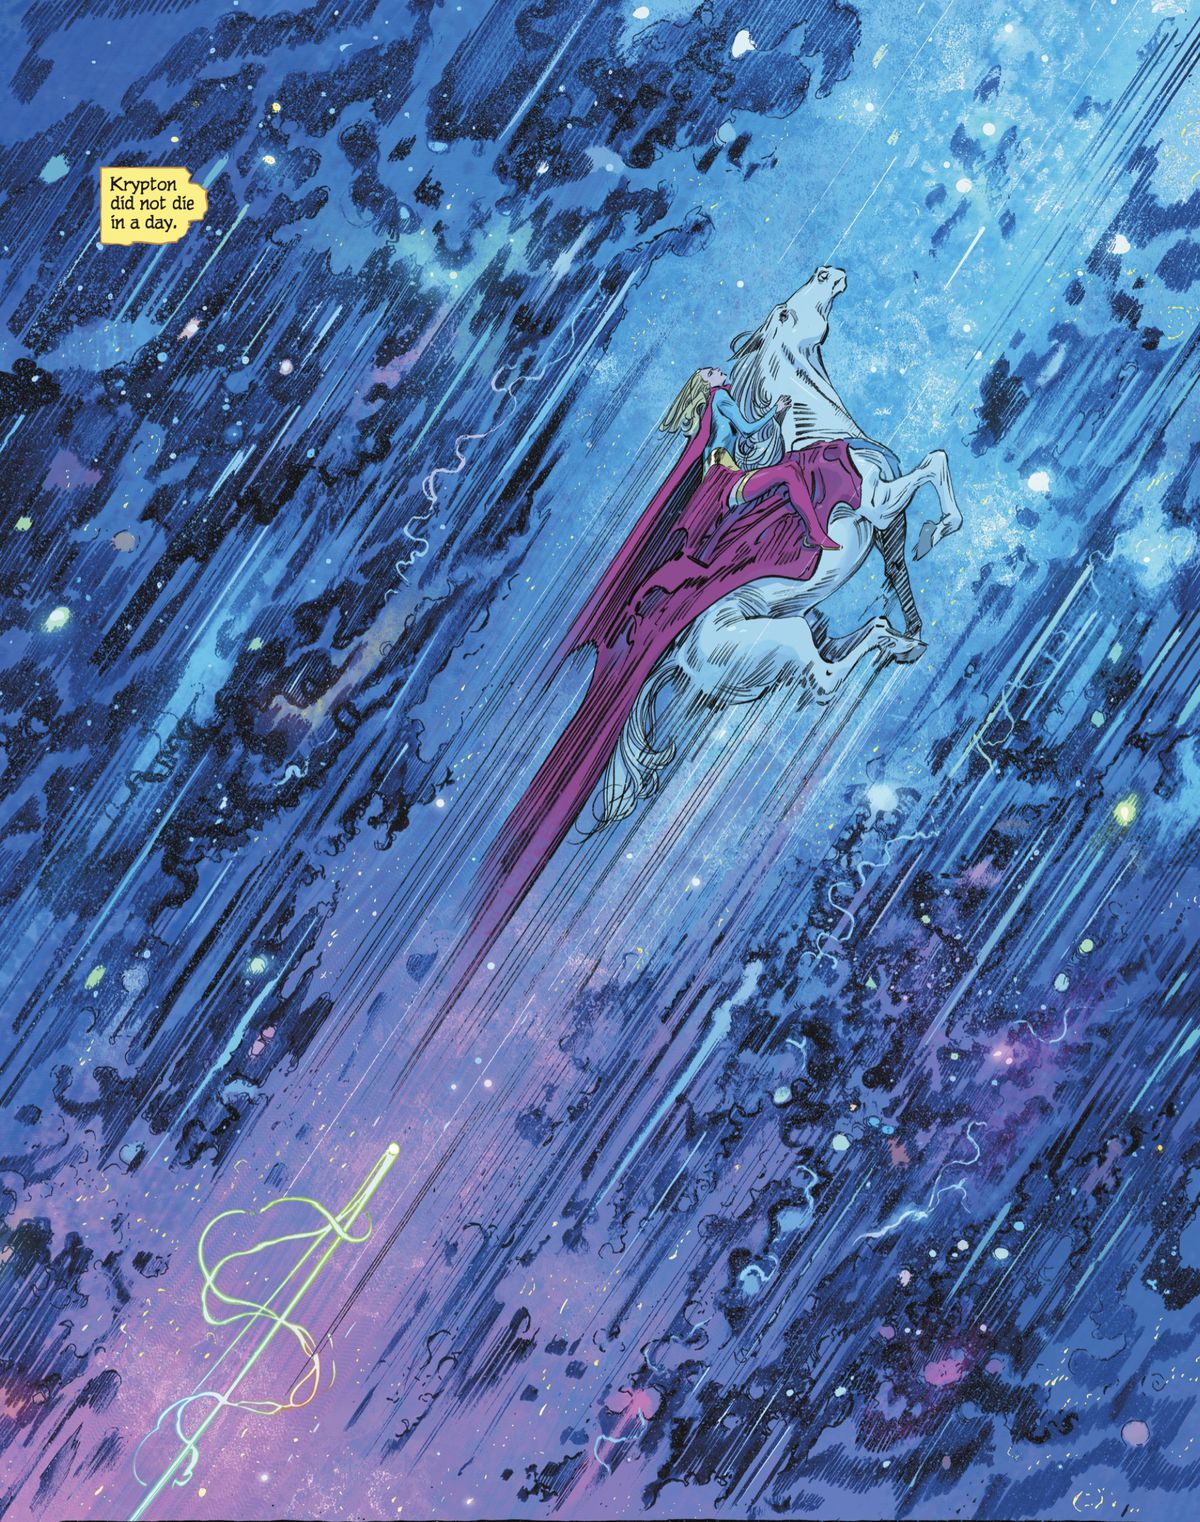 Supergirl rides Comet the Super-horse through blue and pink stars at a speed to break the laws of science and magic, pursued by a rainbow streak of something in Supergirl: Woman of Tomorrow #6 (2021). 